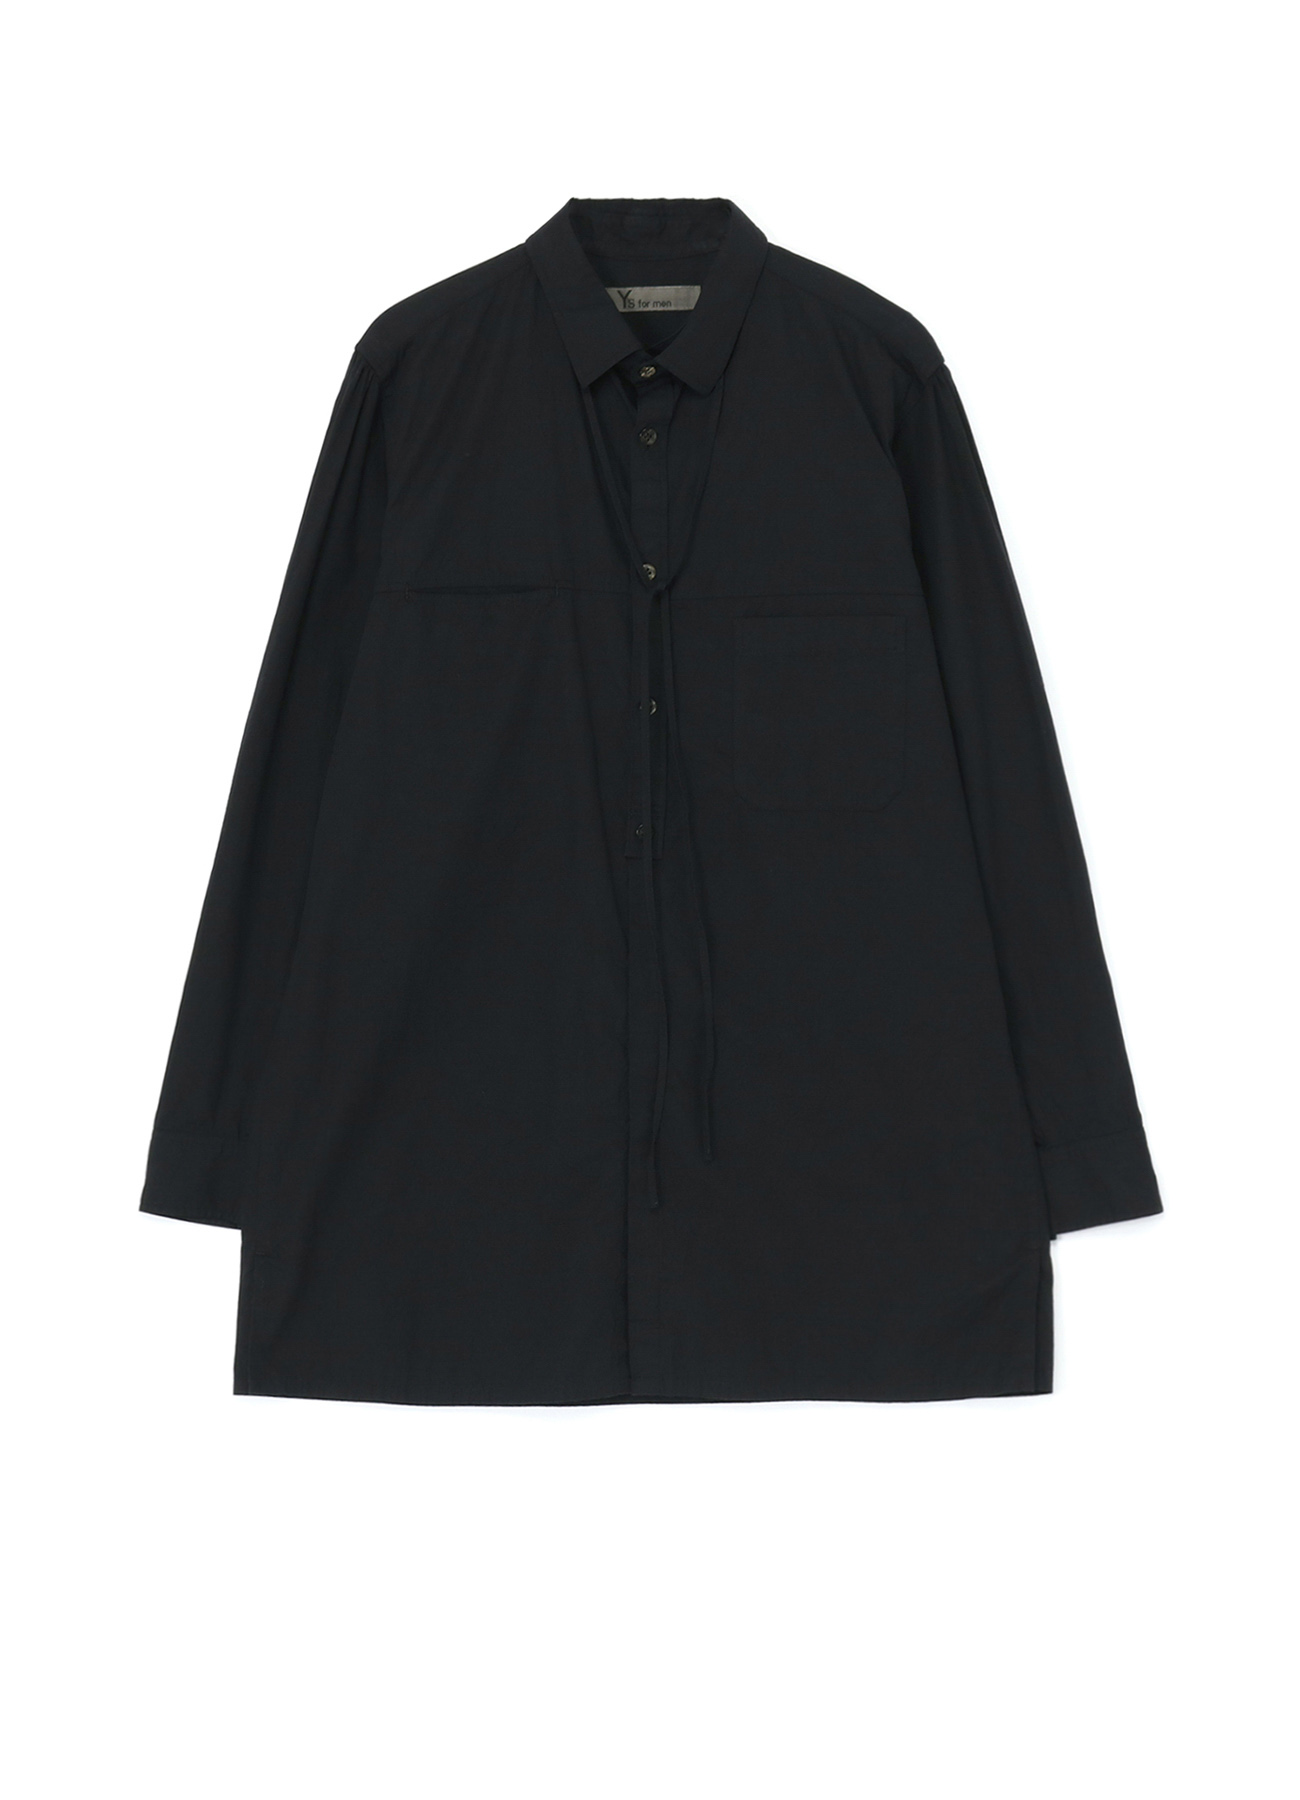 WRINKLED COTTON BROADCLOTH SHIRT WITH COLLAR CORD DETAIL